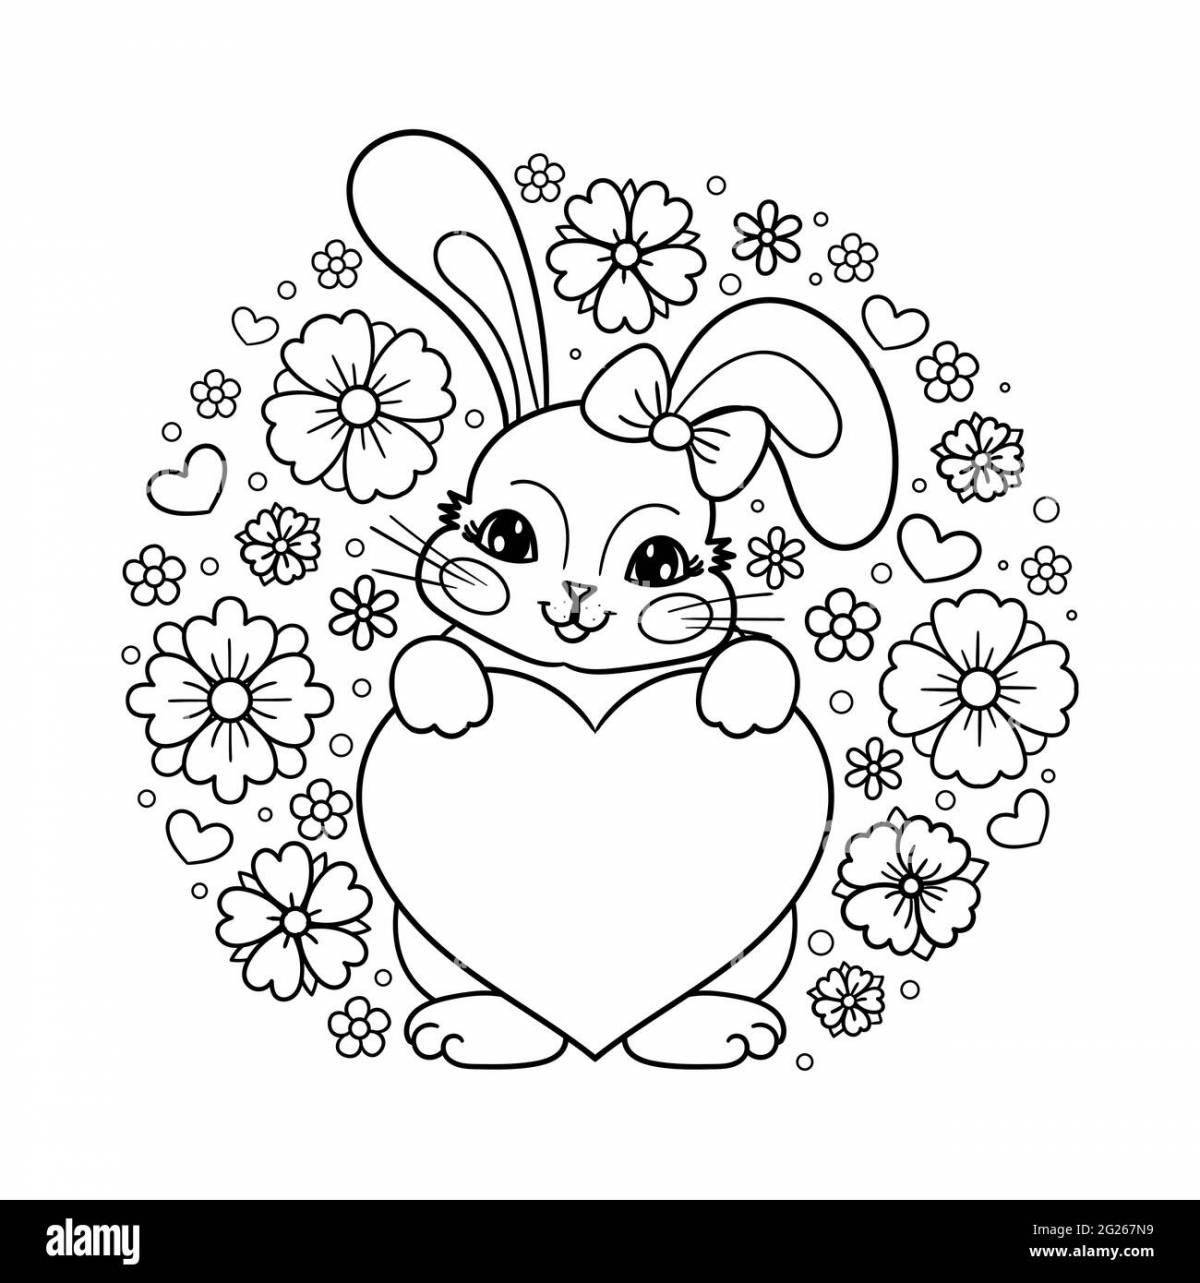 Bright rabbit with a heart coloring book